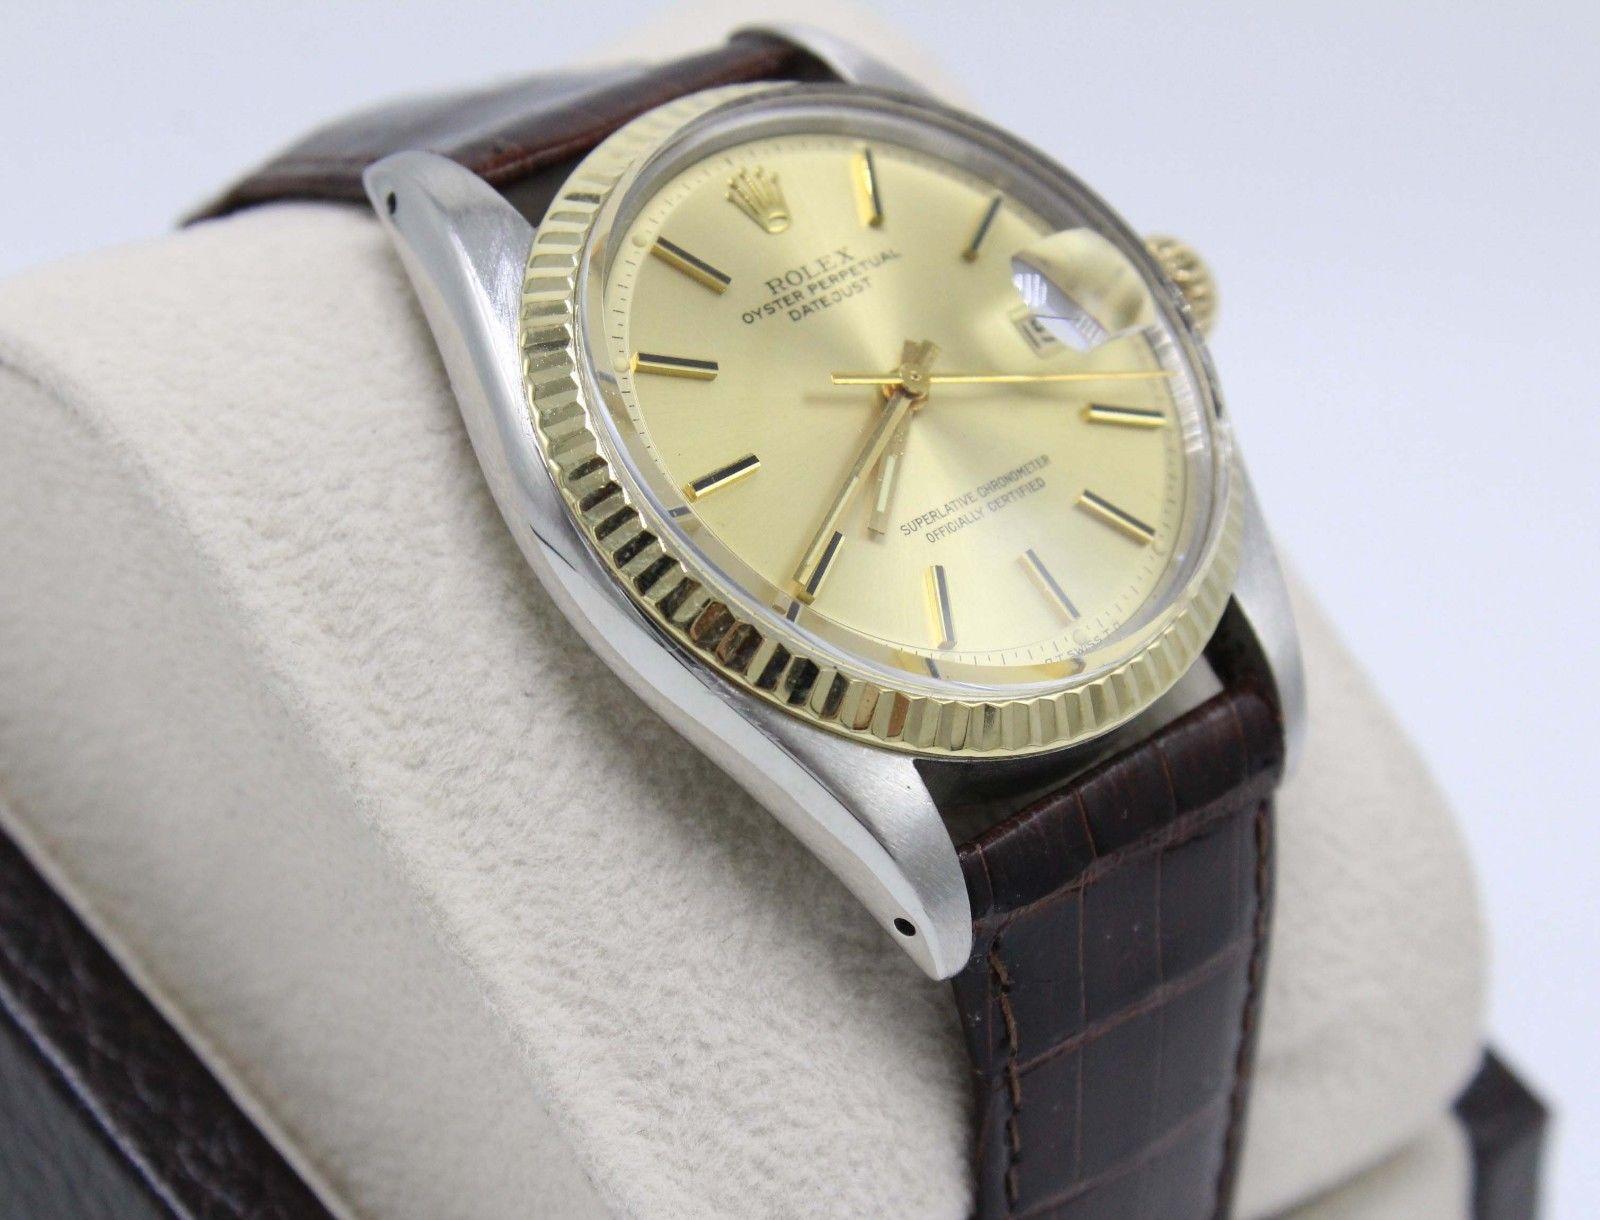 Style Number: 1601

Serial: 3761***

Model: Datejust 

Case Material: Stainless Steel

Band: Brown Leather

Bezel: 14K Yellow Gold

Dial: Champagne

Face: Acrylic 

Case Size: 36mm

Includes: 

-Elegant Watch Box

-Certified Appraisal 

-6 Month